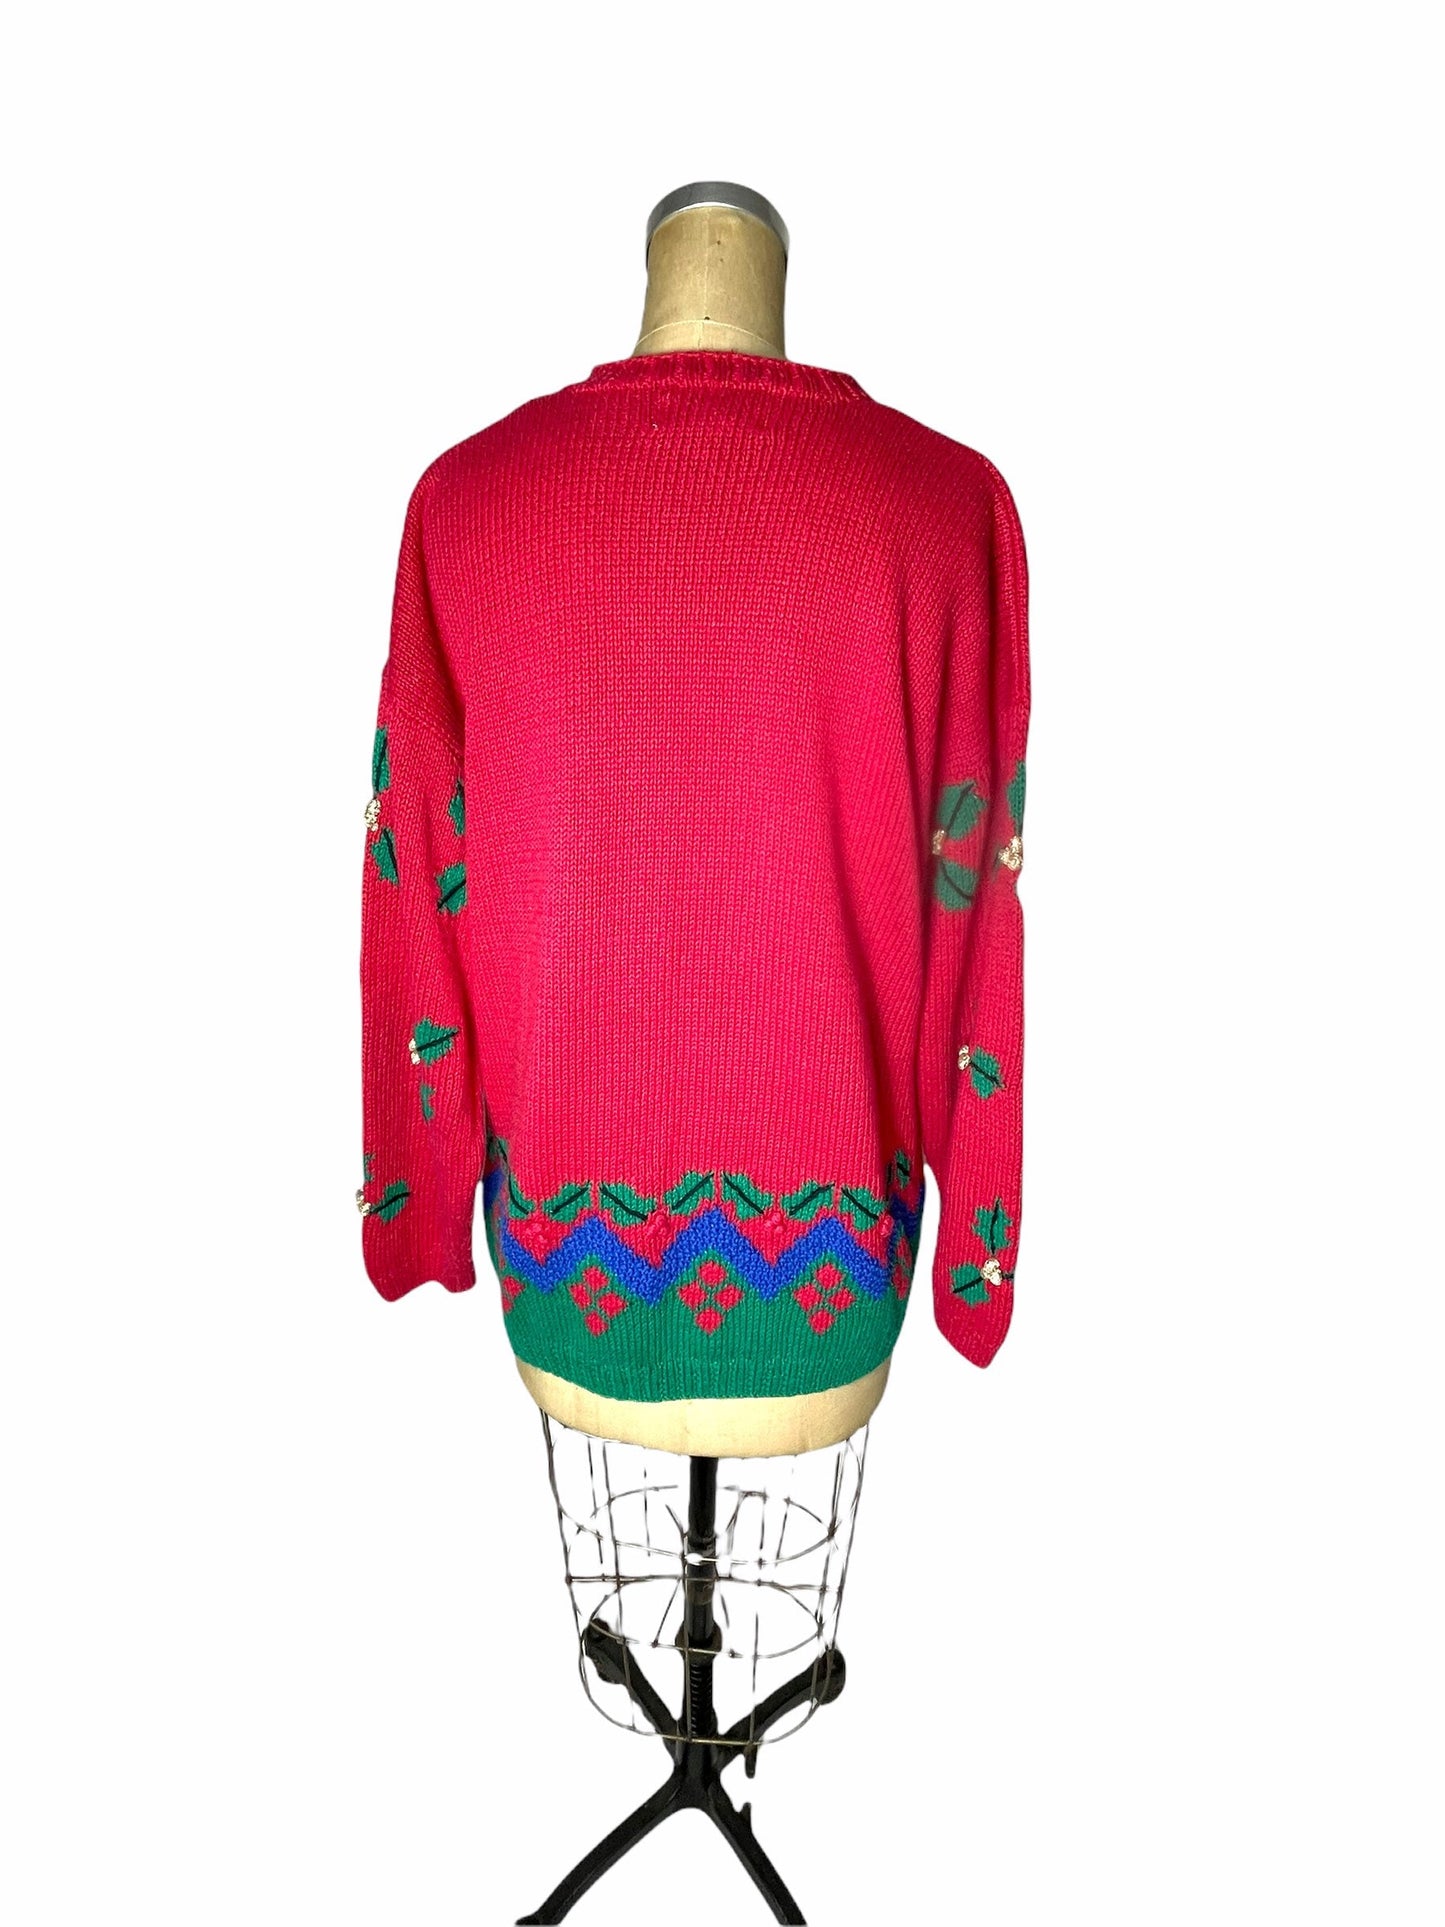 Christmas sweater holiday party hand knitted sweater by Talbots Size XL